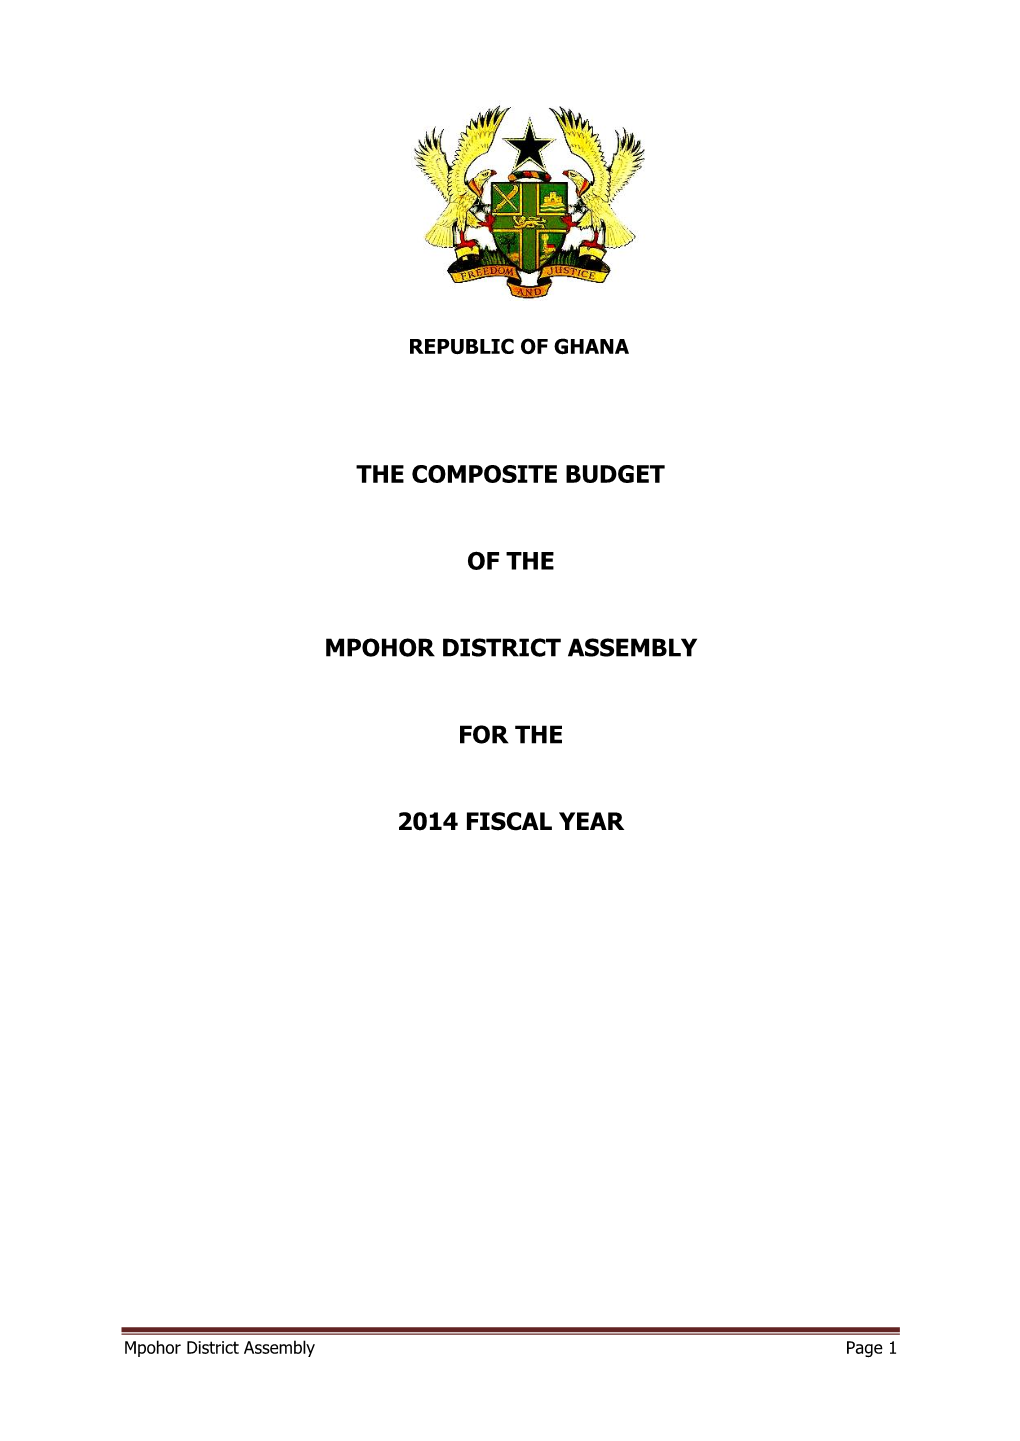 The Composite Budget of the Mpohor District Assembly